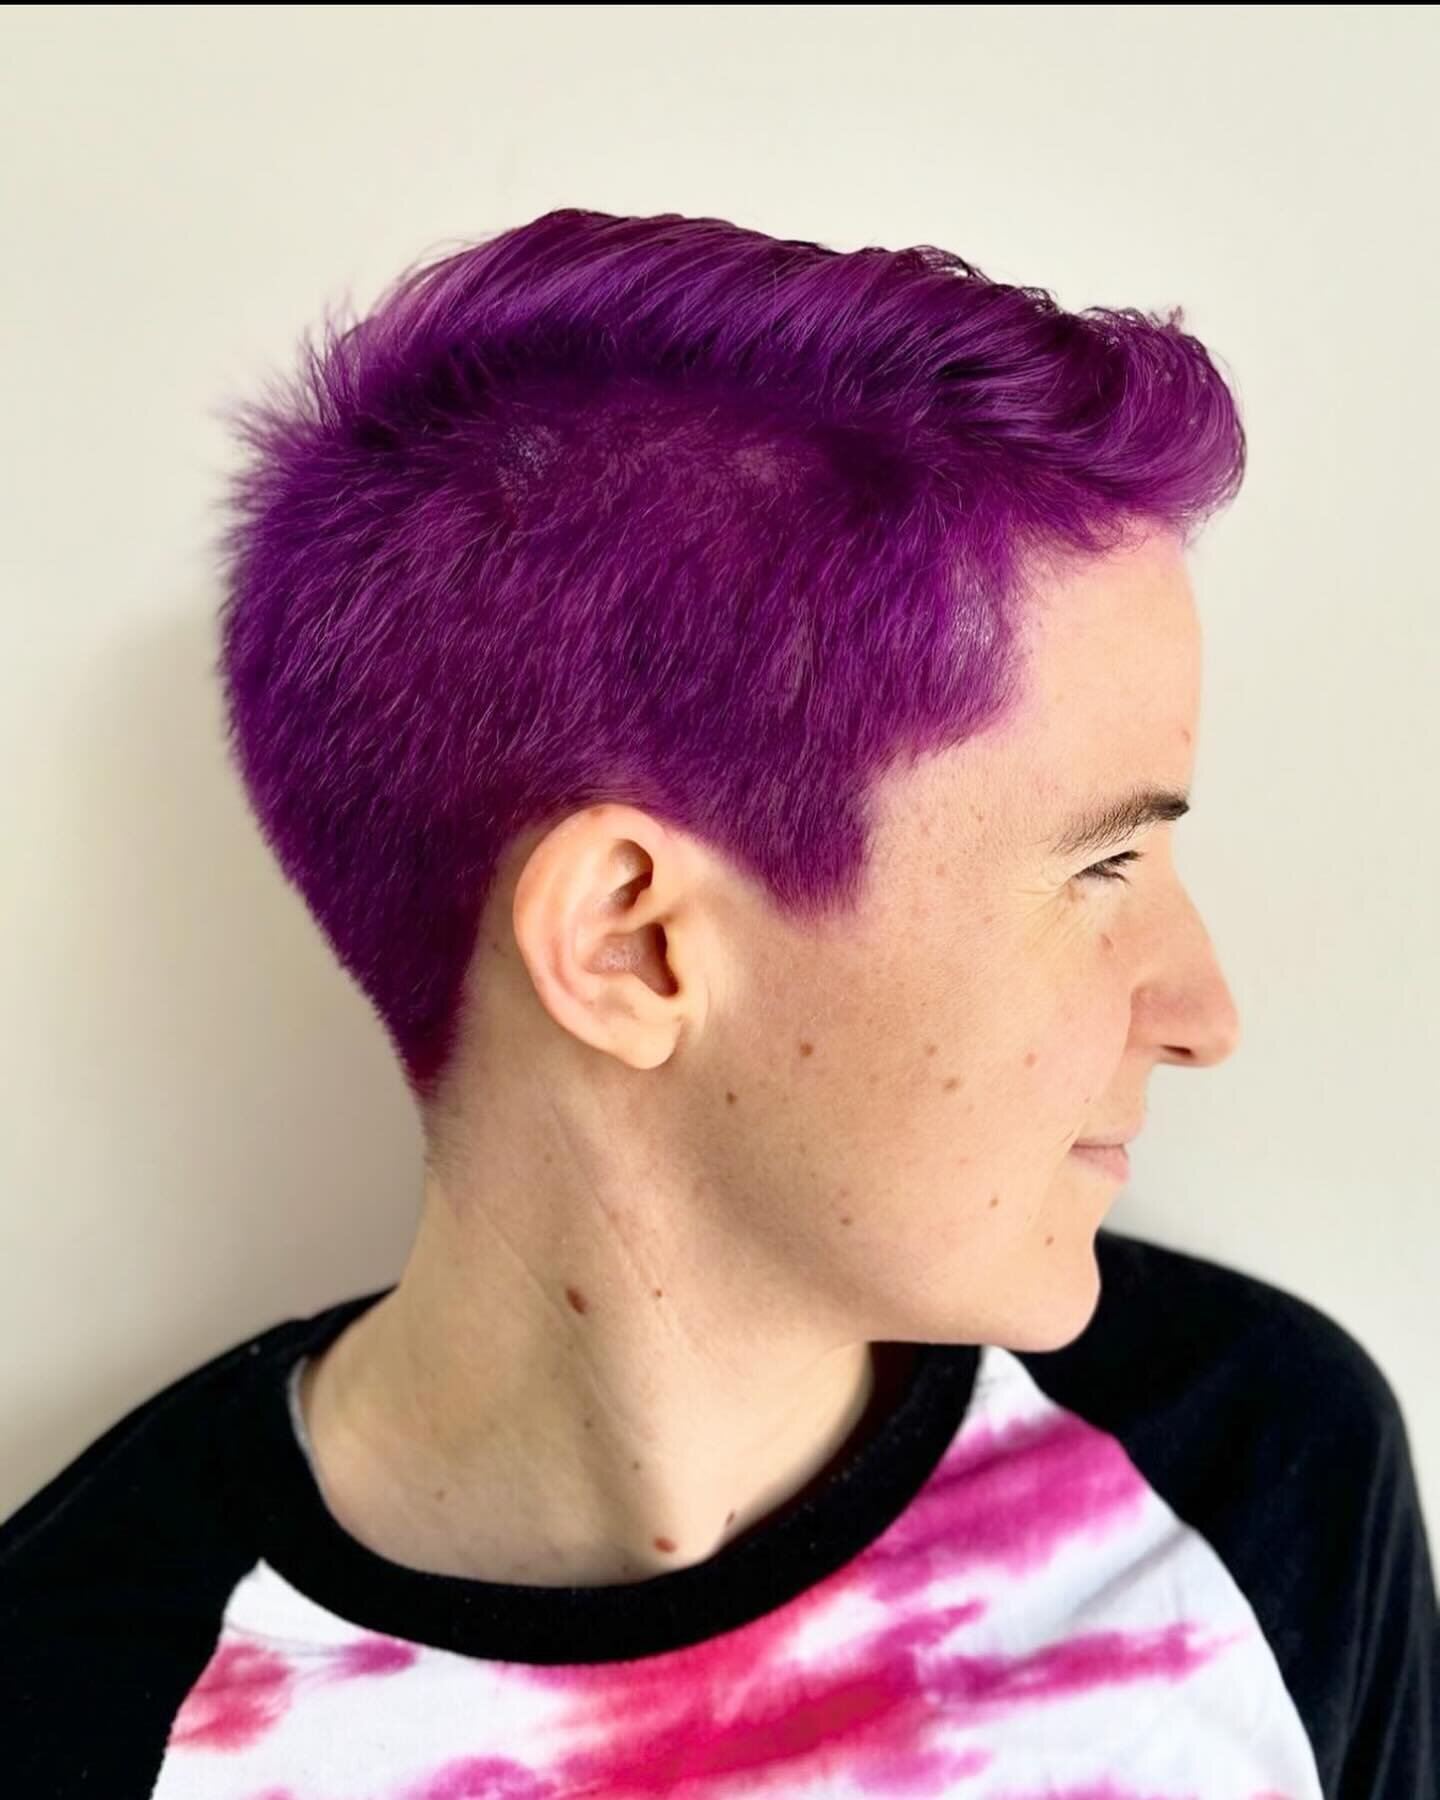 Purps by @hairbykaileyy 
.
First time ever coloring their hair and purple is so their color
#dangerjones #dangerjonesmasquerade #purplehair #ithacany #cortlandny #tompkinscounty #ithacastylist